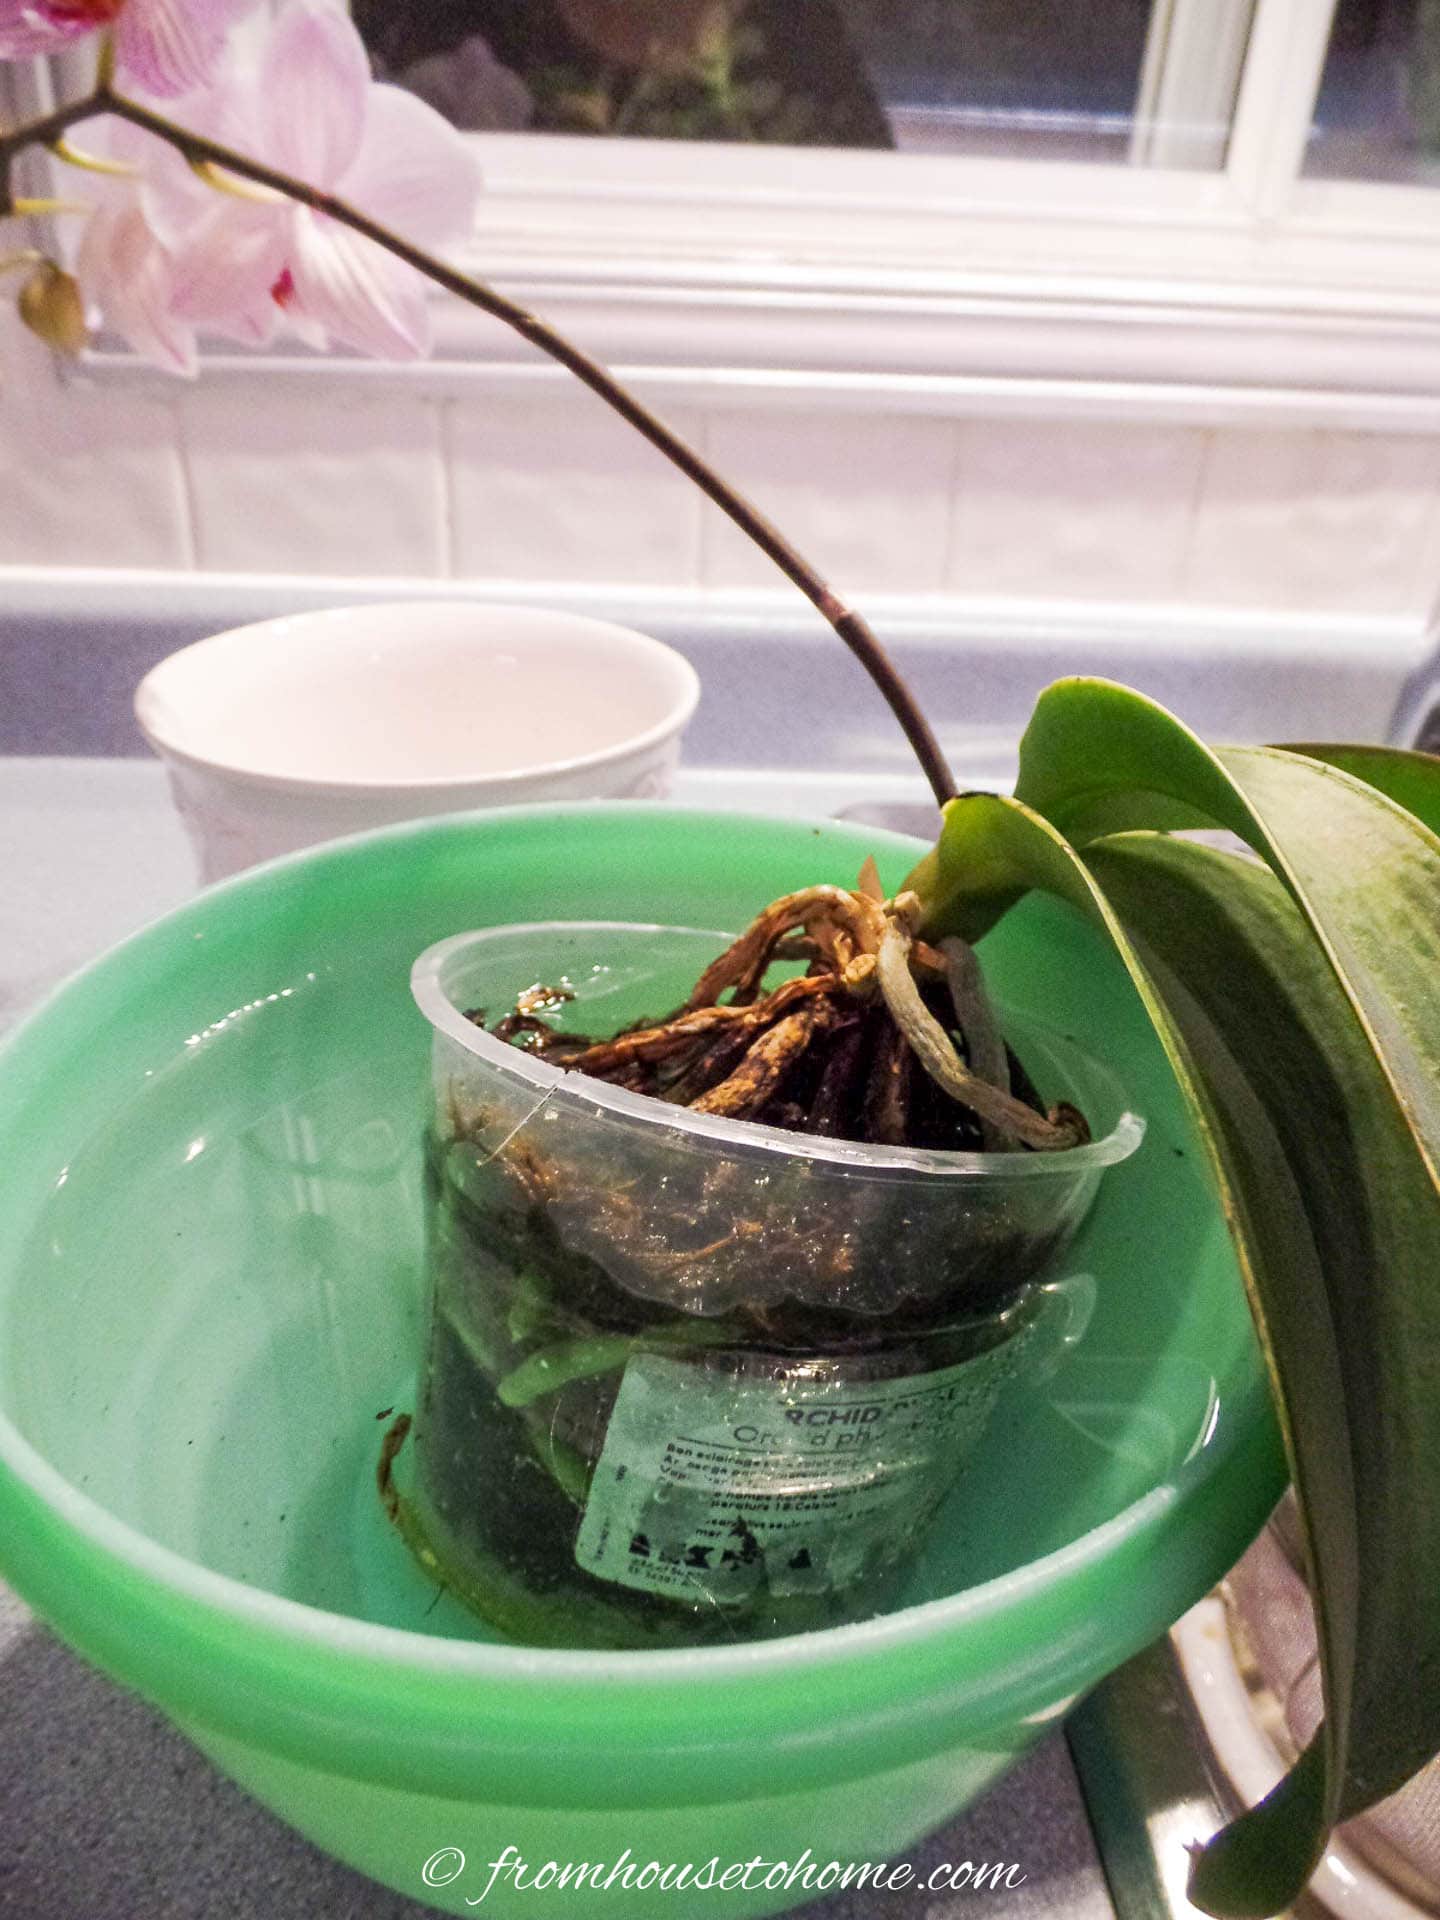 Phalaenopsis orchid being watered in a bowl of water